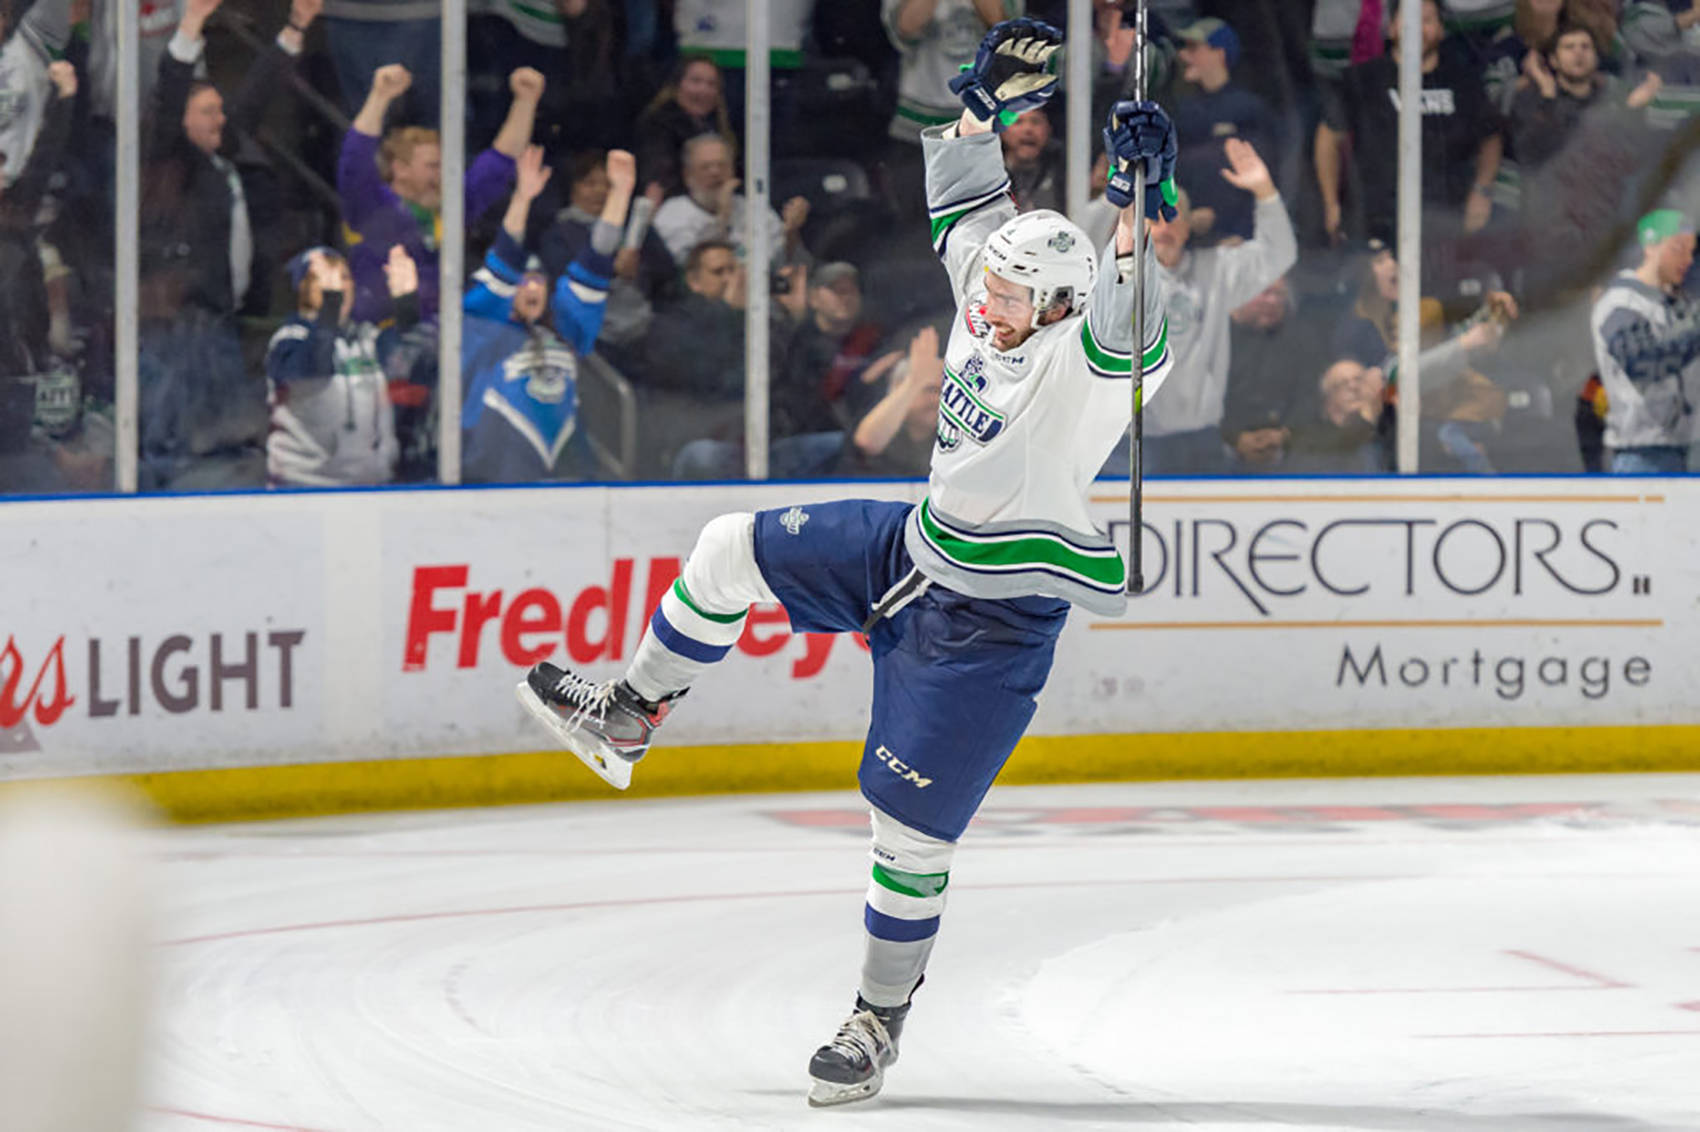 The Thunderbirds’ Turner Ottenbreit celebrates after scoring the decisive, shootout goal against Swift Current at the accesso ShoWare Center on Saturday night. COURTESY PHOTO, Brian Liesse/T-Birds